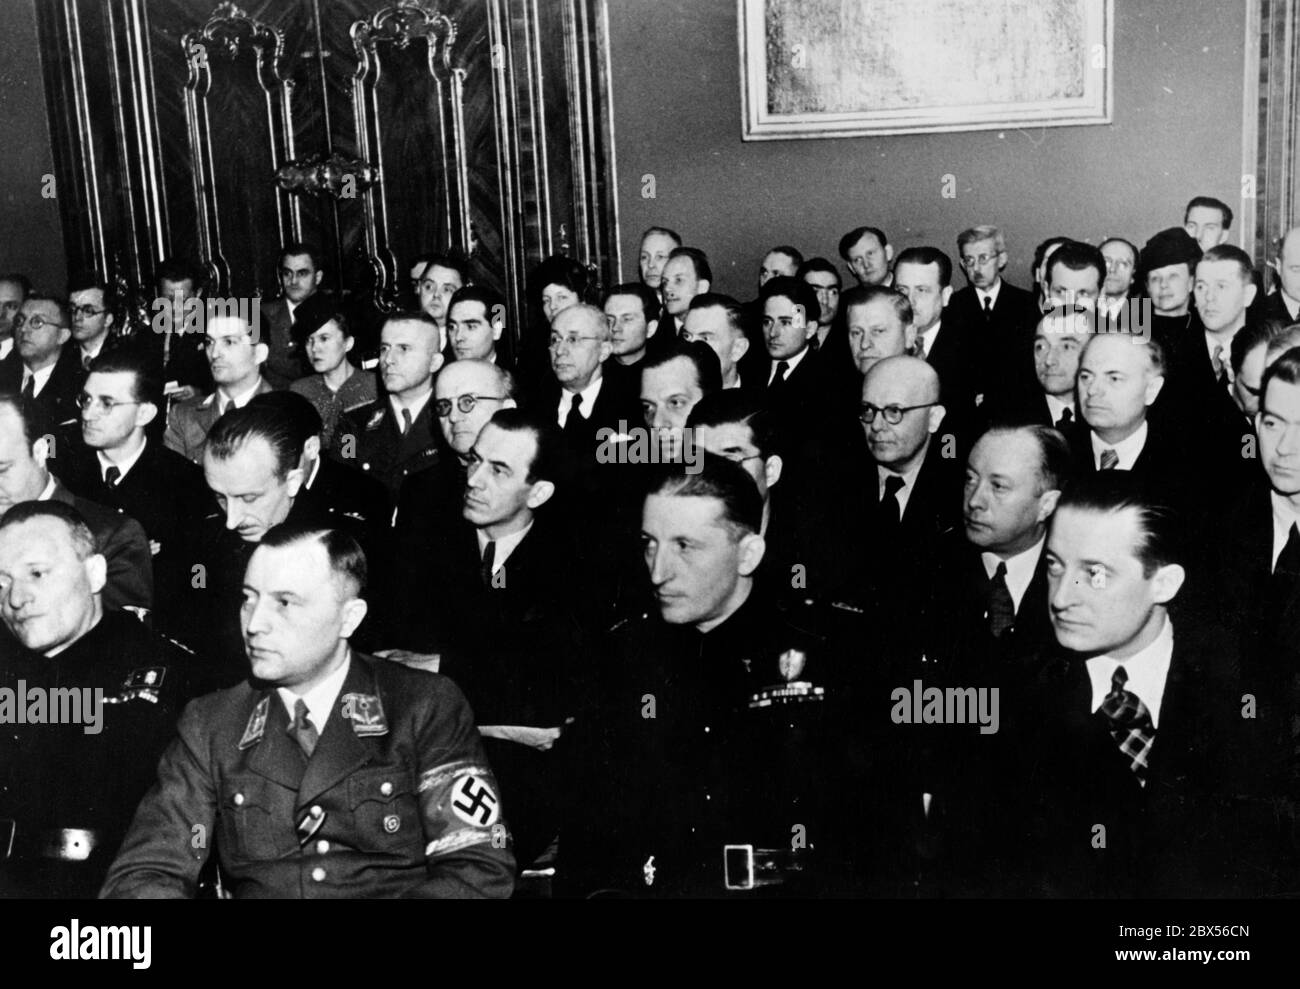 View of the German and foreign delegations of journalists who came to Vienna to found the 'Union of National Associations of Journalists' (UJV), during the speech of the head of the Reich Press, Otto Dietrich, at a press reception in Palais Schoenborn. Stock Photo